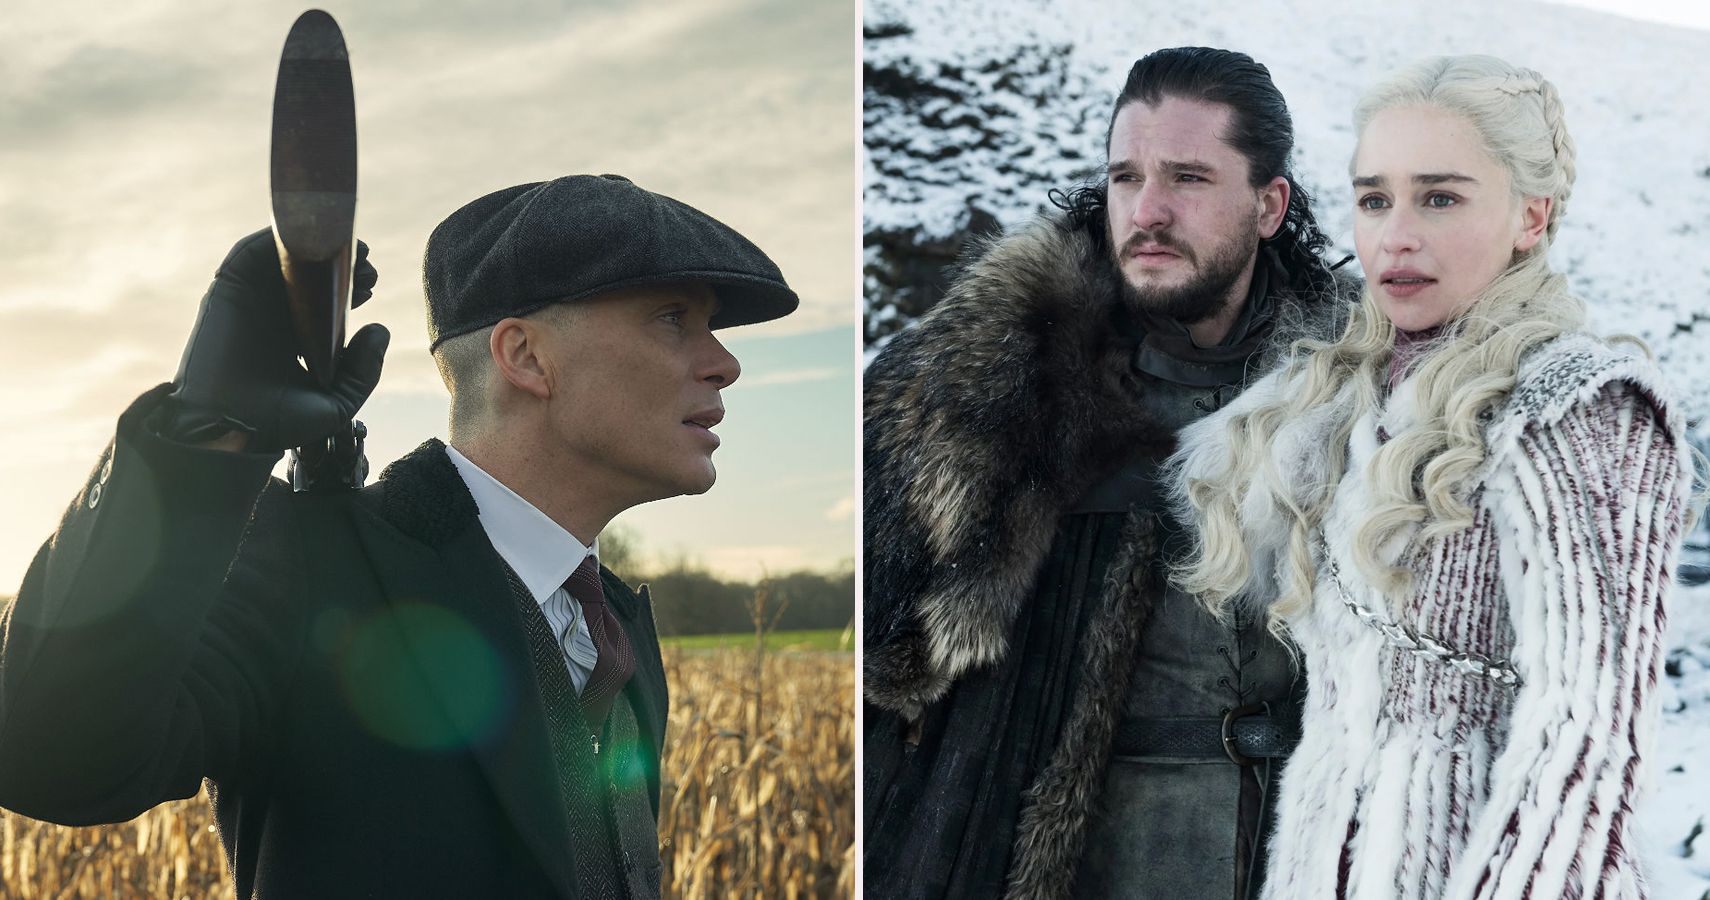 The Top 10 Tv Shows Of 2019 According To Imdb Screenrant